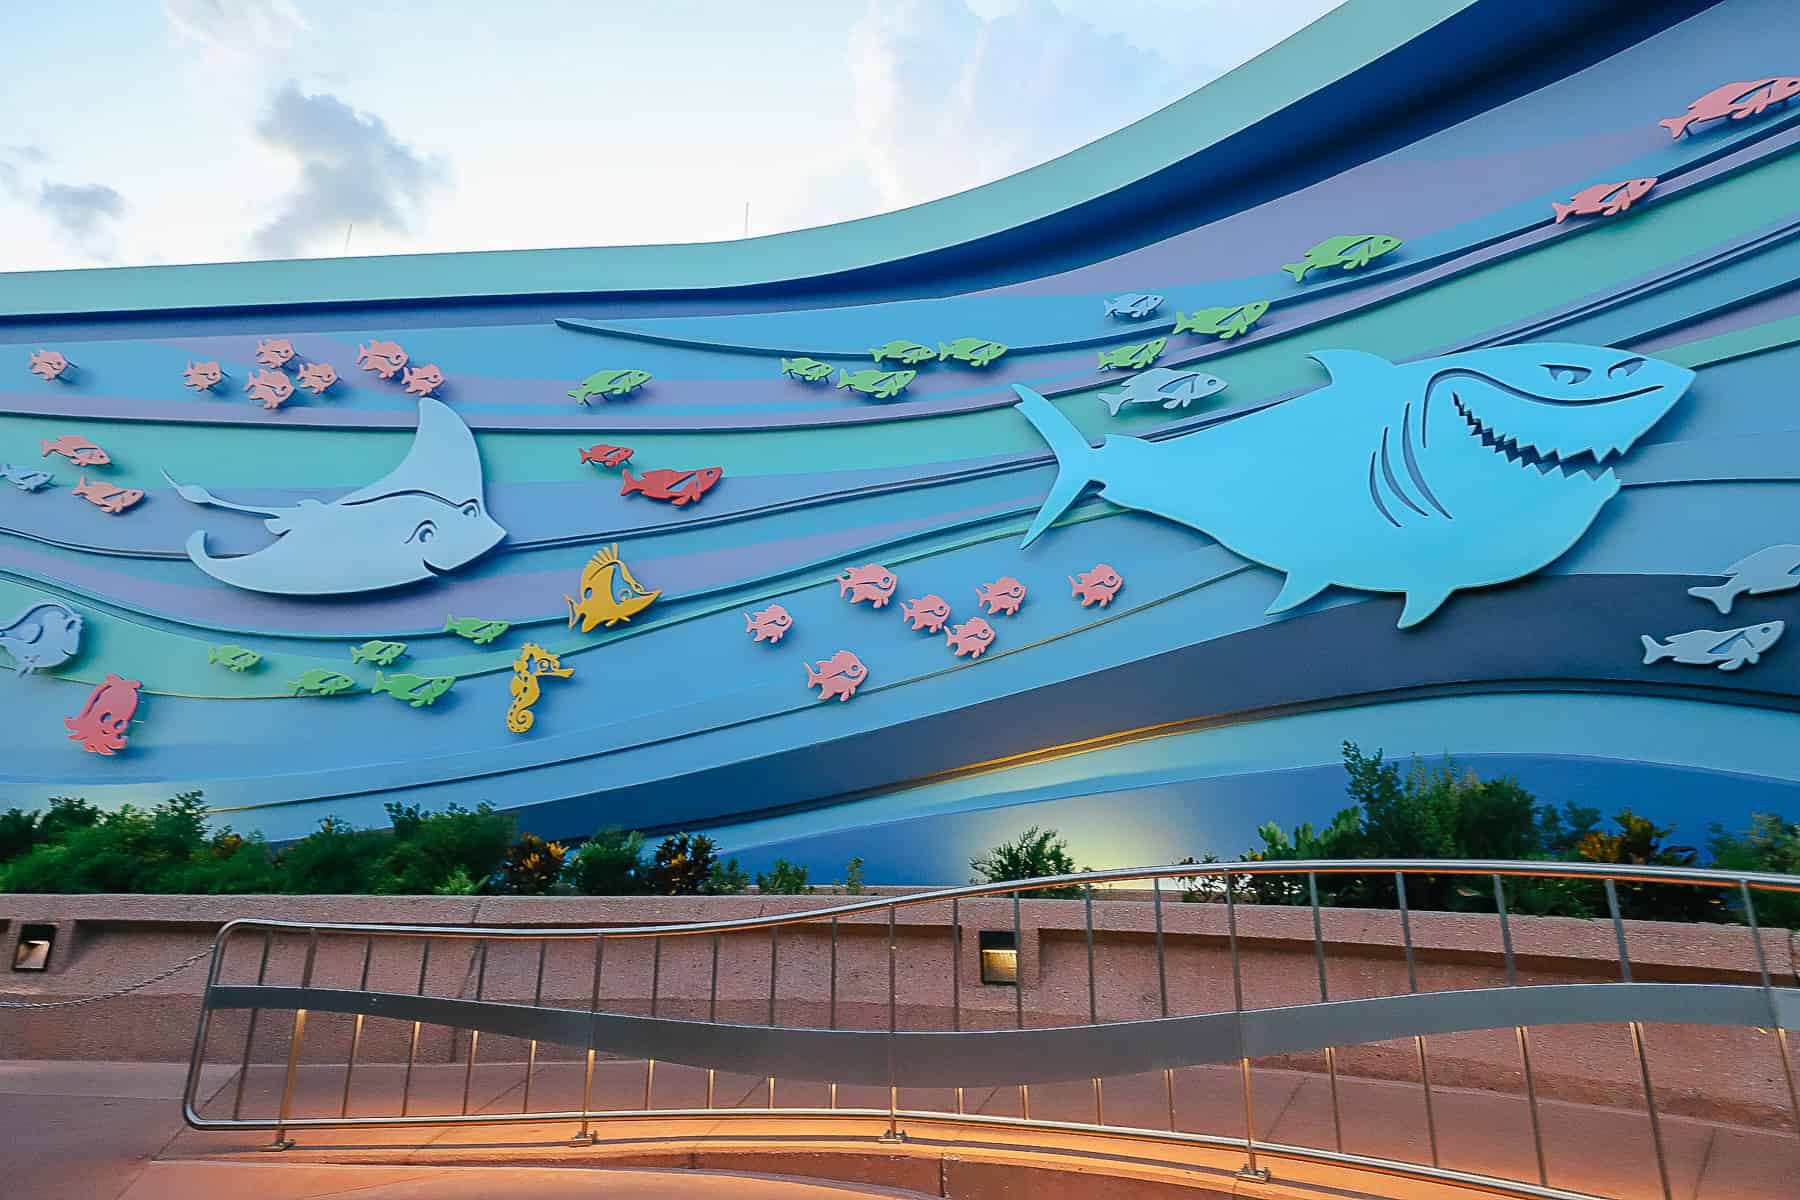 Giant fish cut-outs decorate the exterior of The Seas ride. 